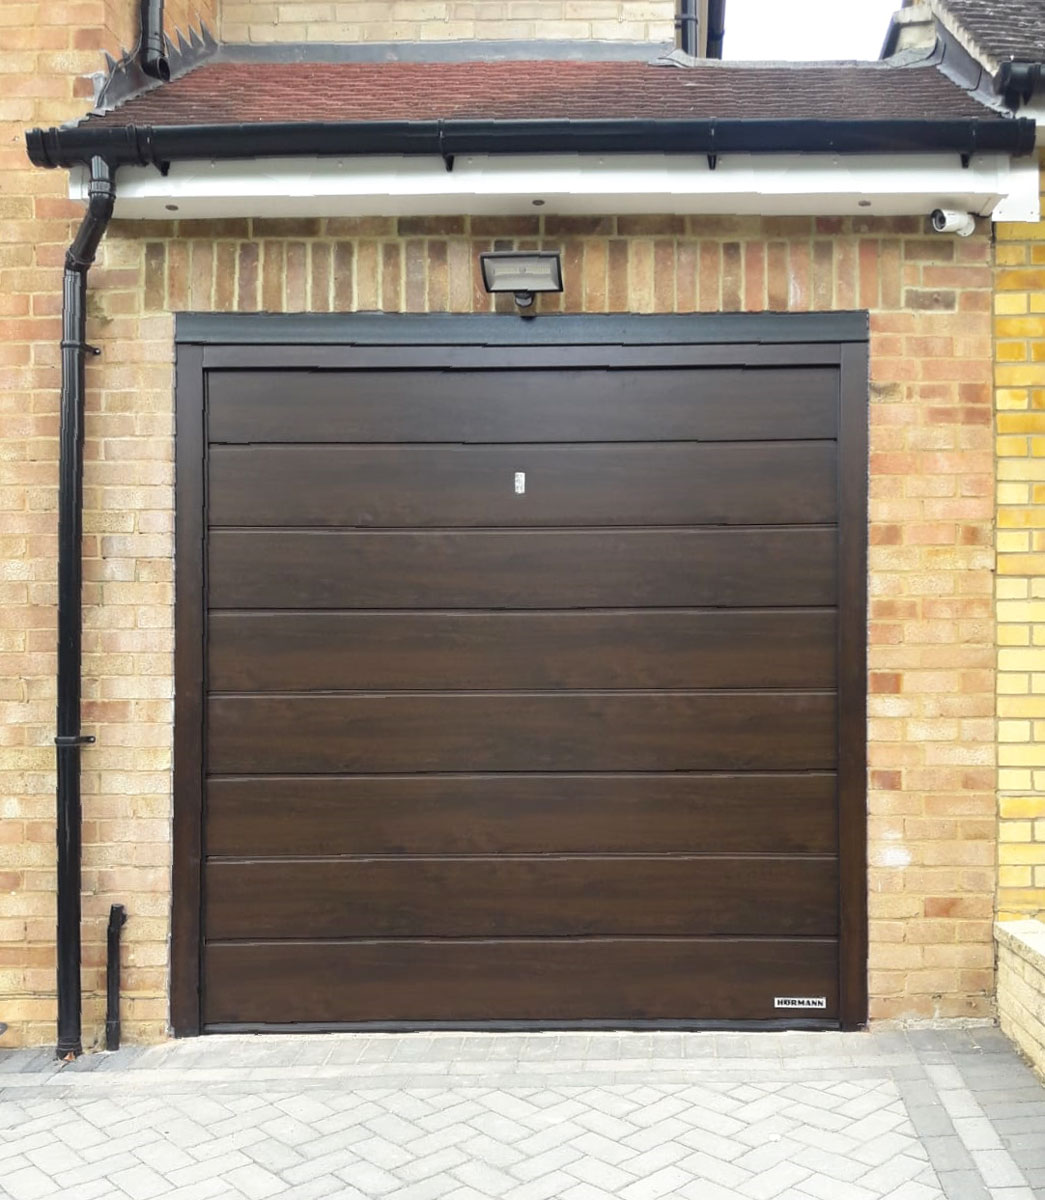 A Hormann LPU42 M Ribbed, Insulated Sectional Garage Door finished in a Dark Oak Decograin